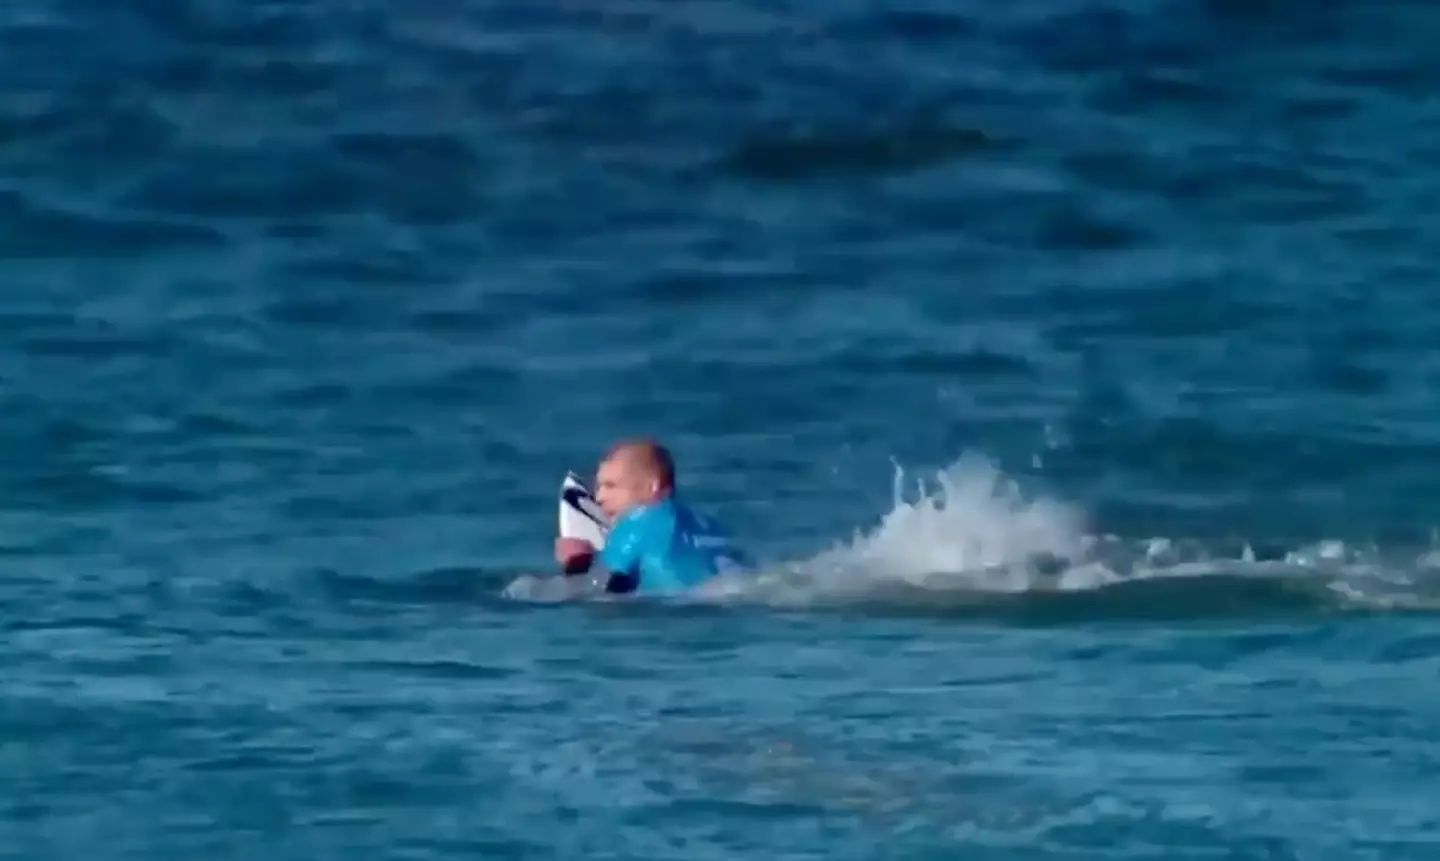 Mick Fanning was attacked by a shark on live TV.